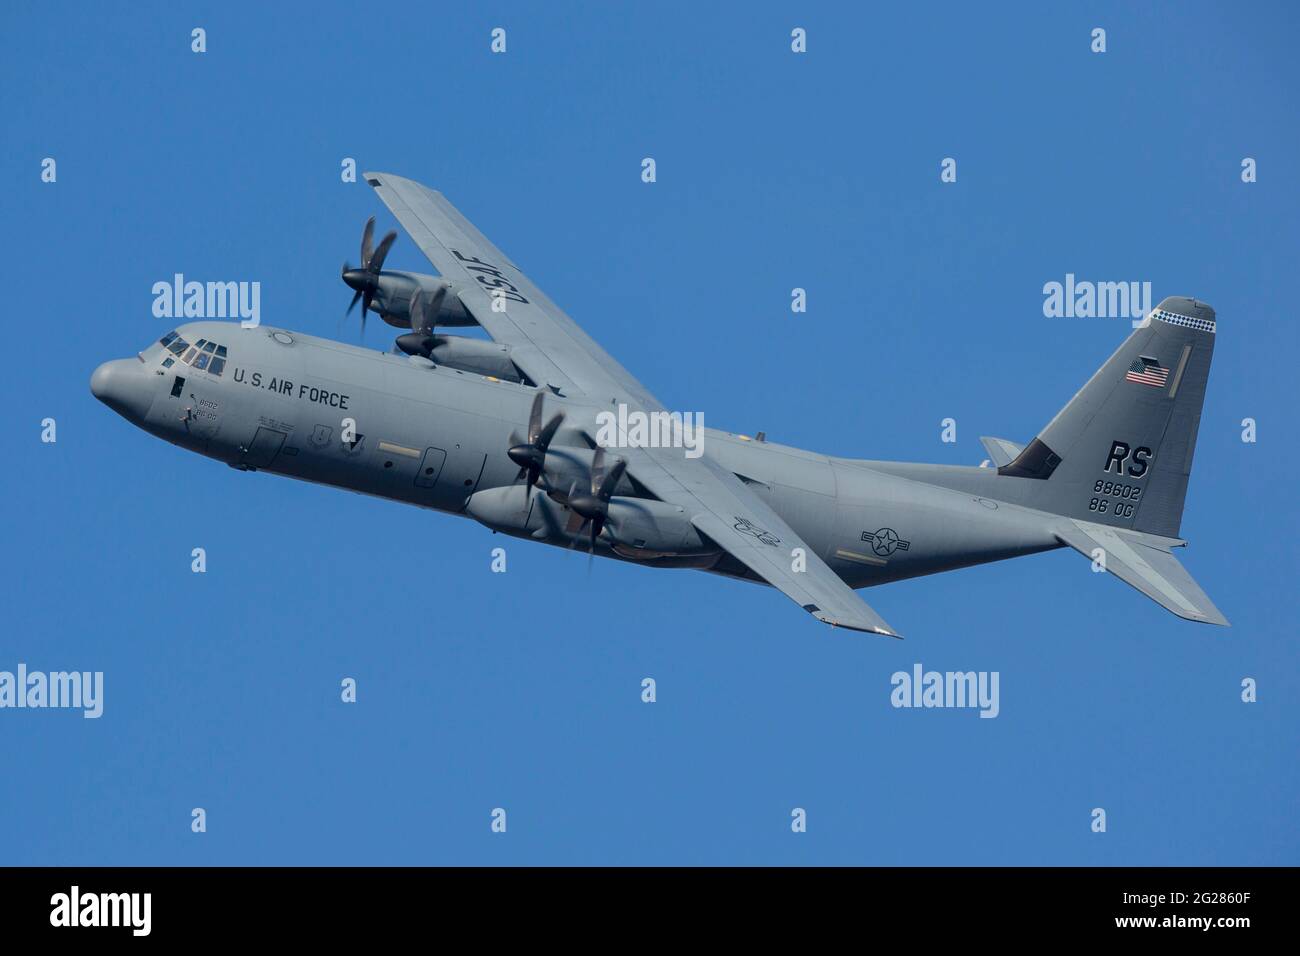 U.S. Air Force C-130J of the 86th Airlift wing overhead Ramstein Air Base, Germany. Stock Photo